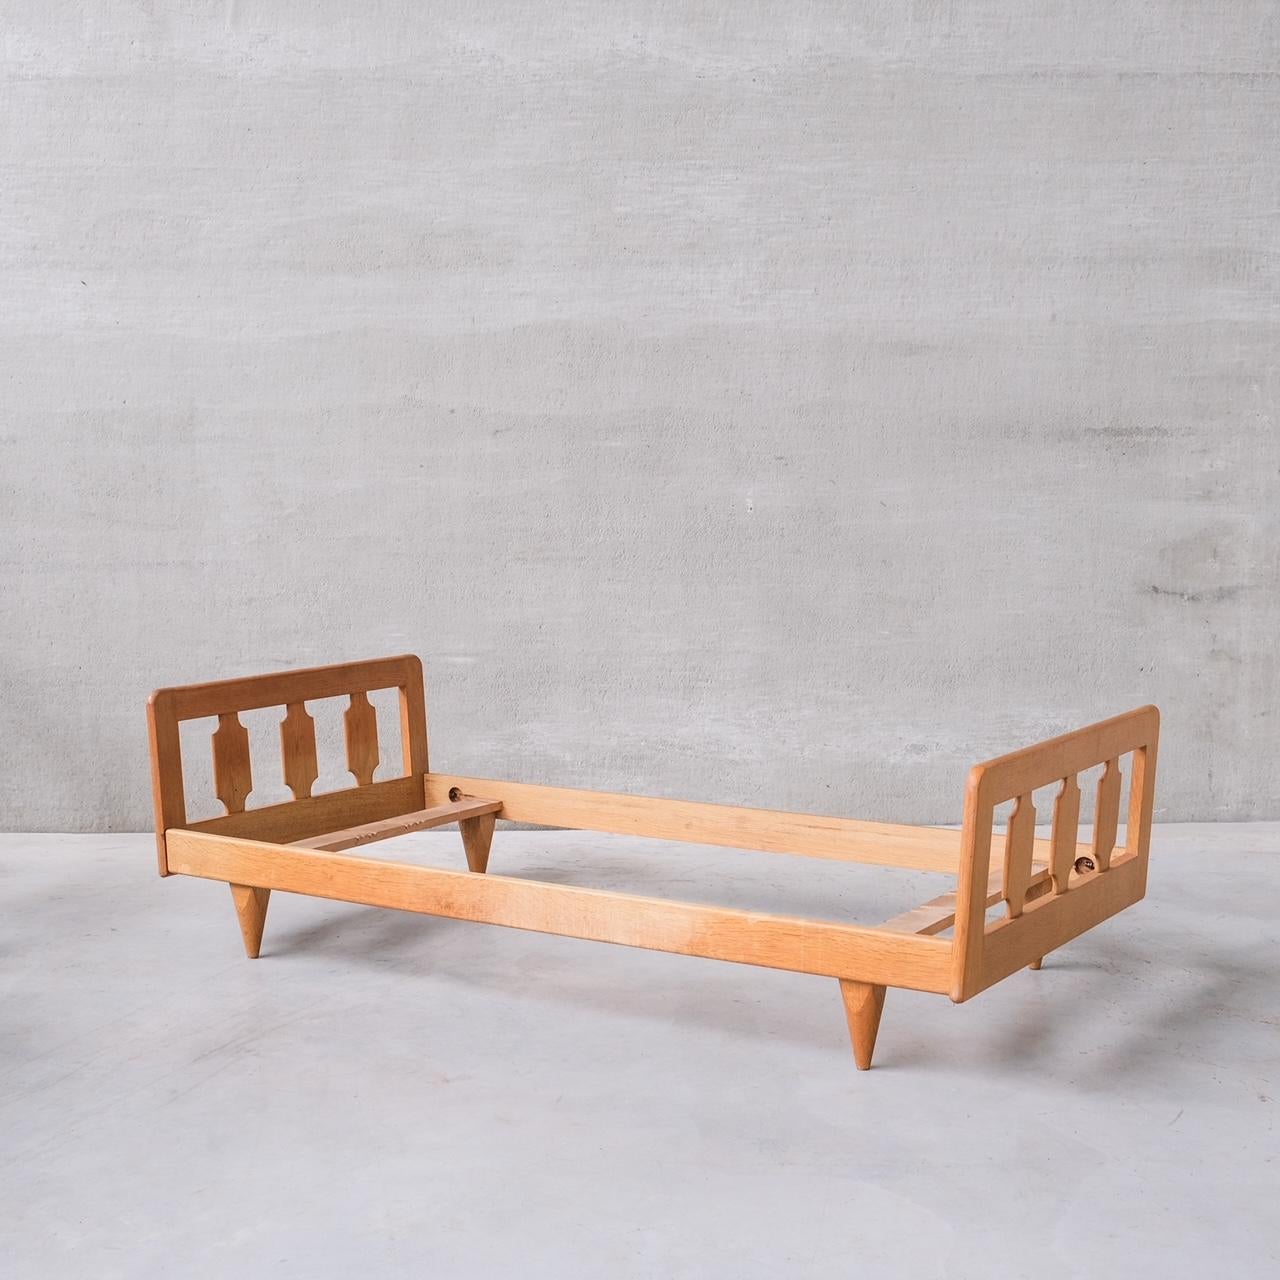 A Guillerme et Chambron day bed,

France, c1960s.

Oak.

No mattress or cushion was retained, this can be used as a day bed or single bed.

Good vintage condition, some scuffs and wear commensurate with age.

Internal ref: 18/10/23/043.

Location: